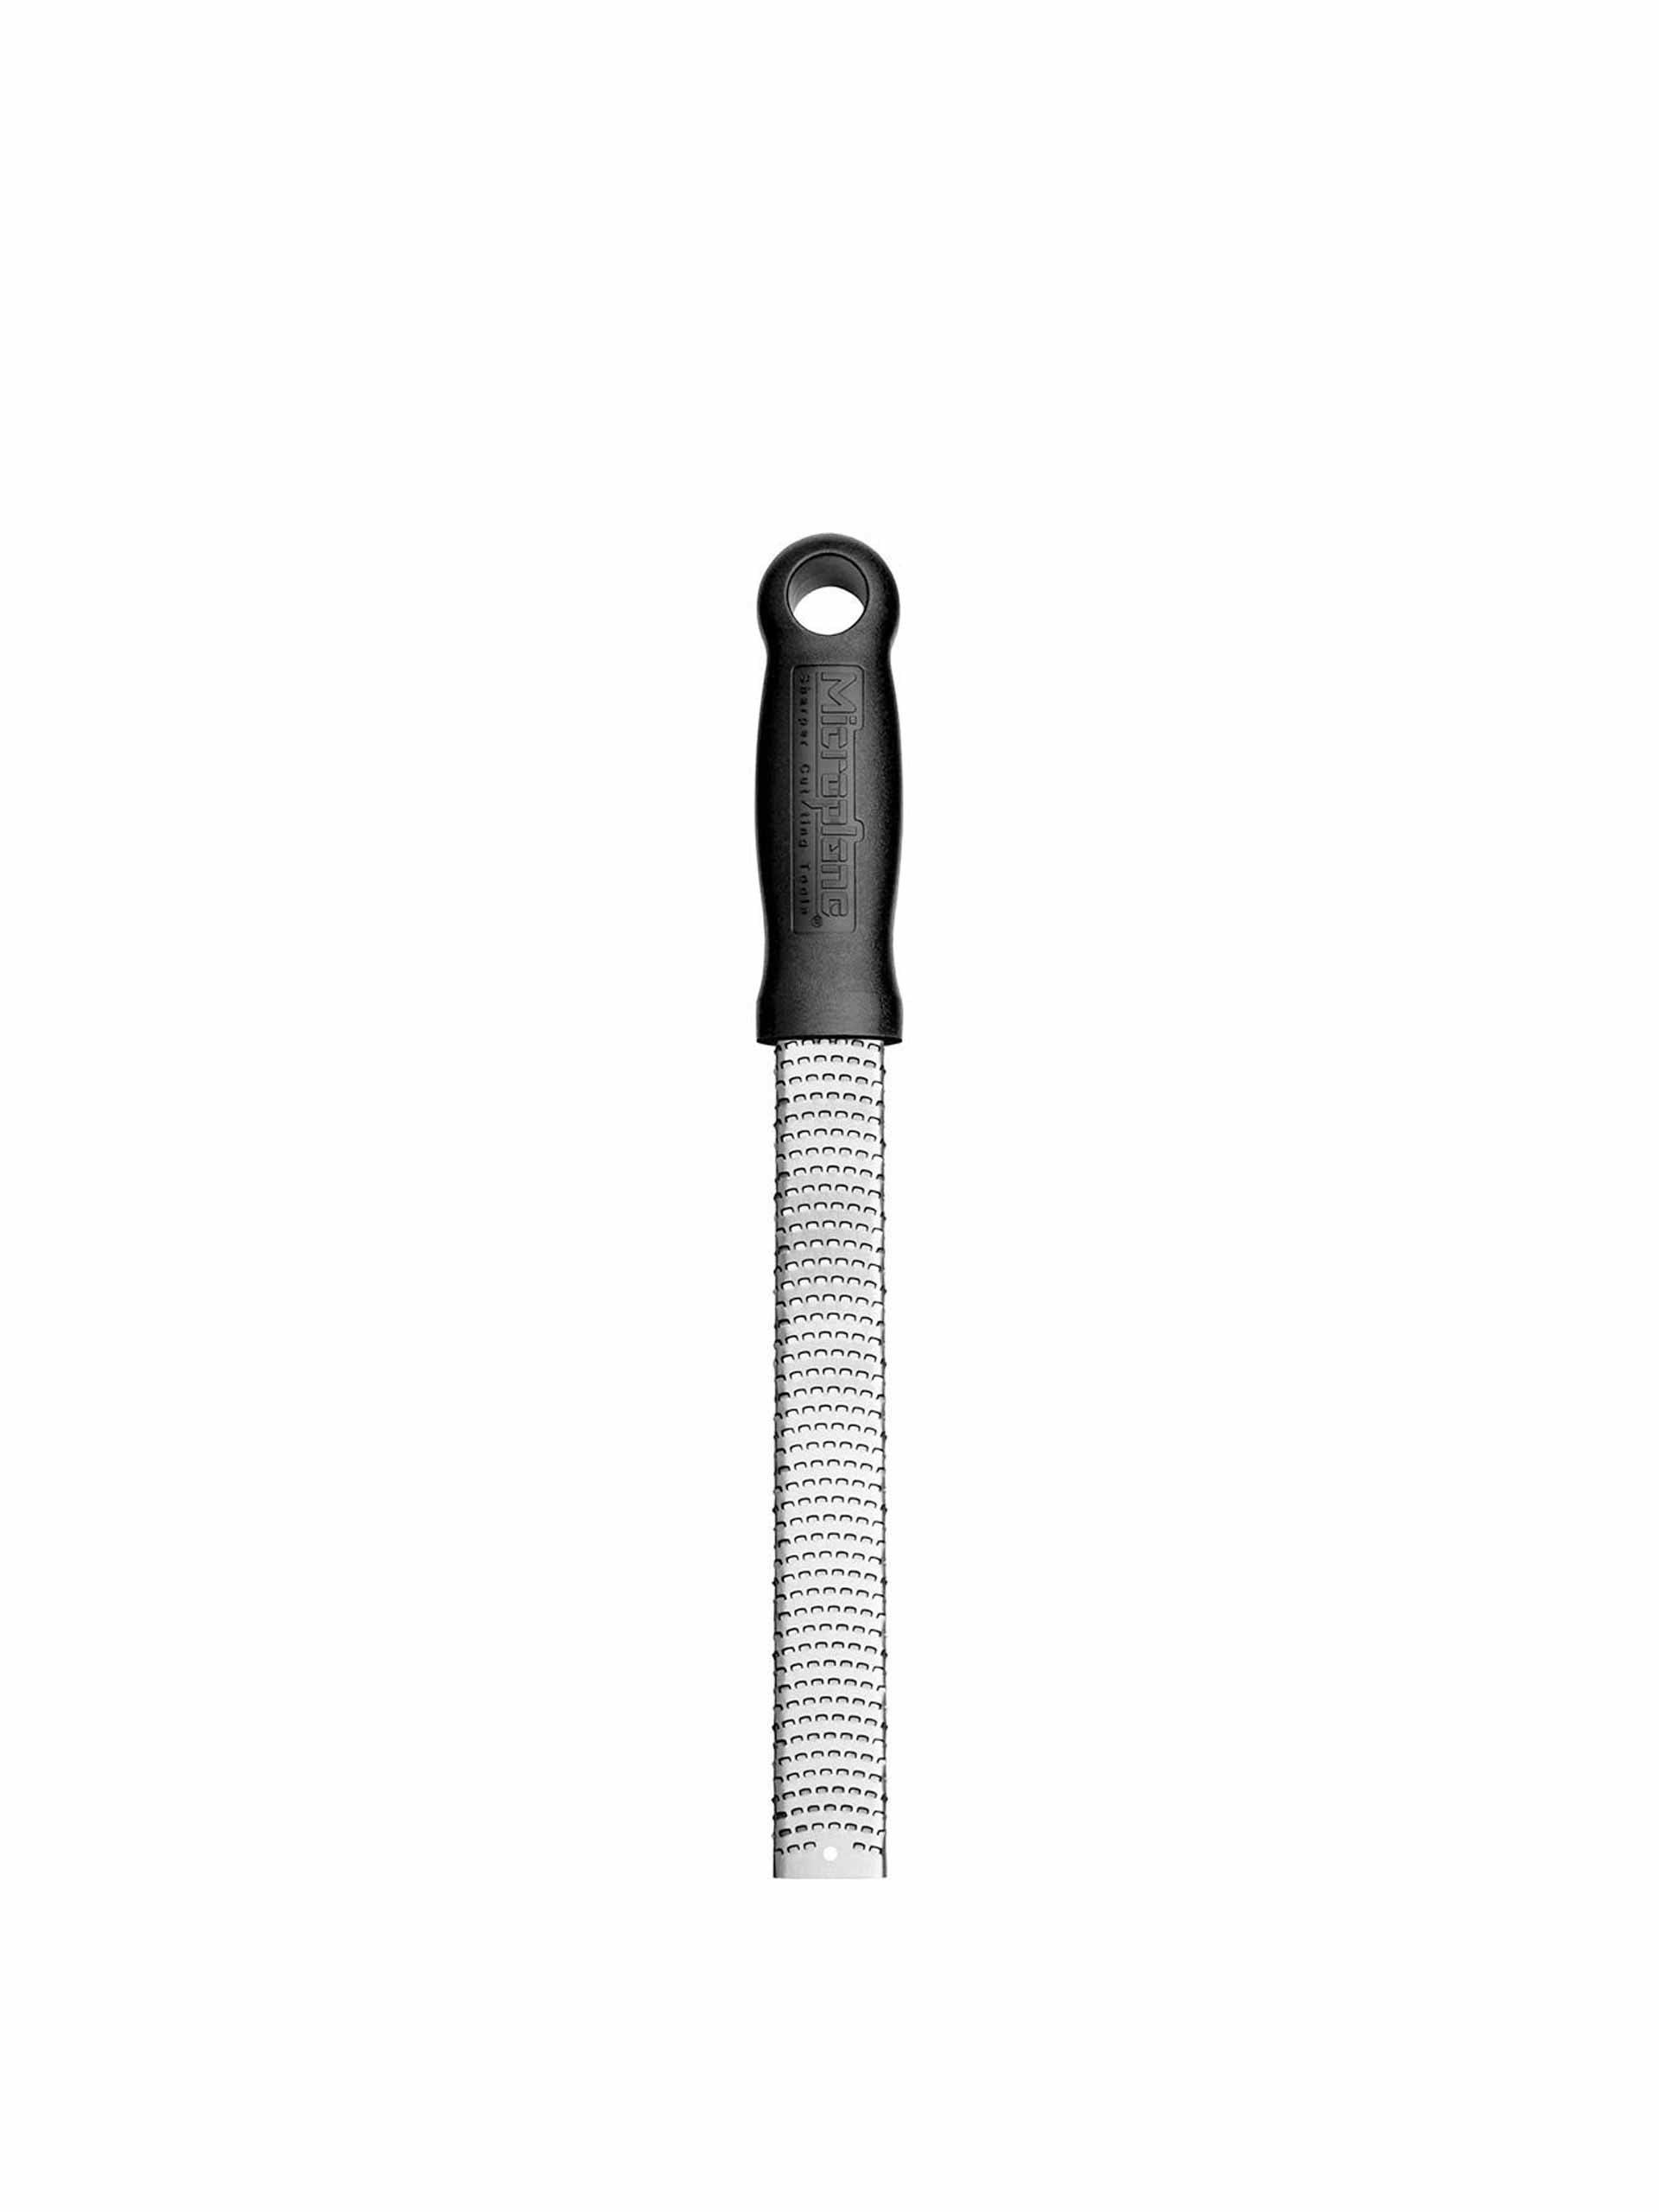 Stainless steel zester/grater